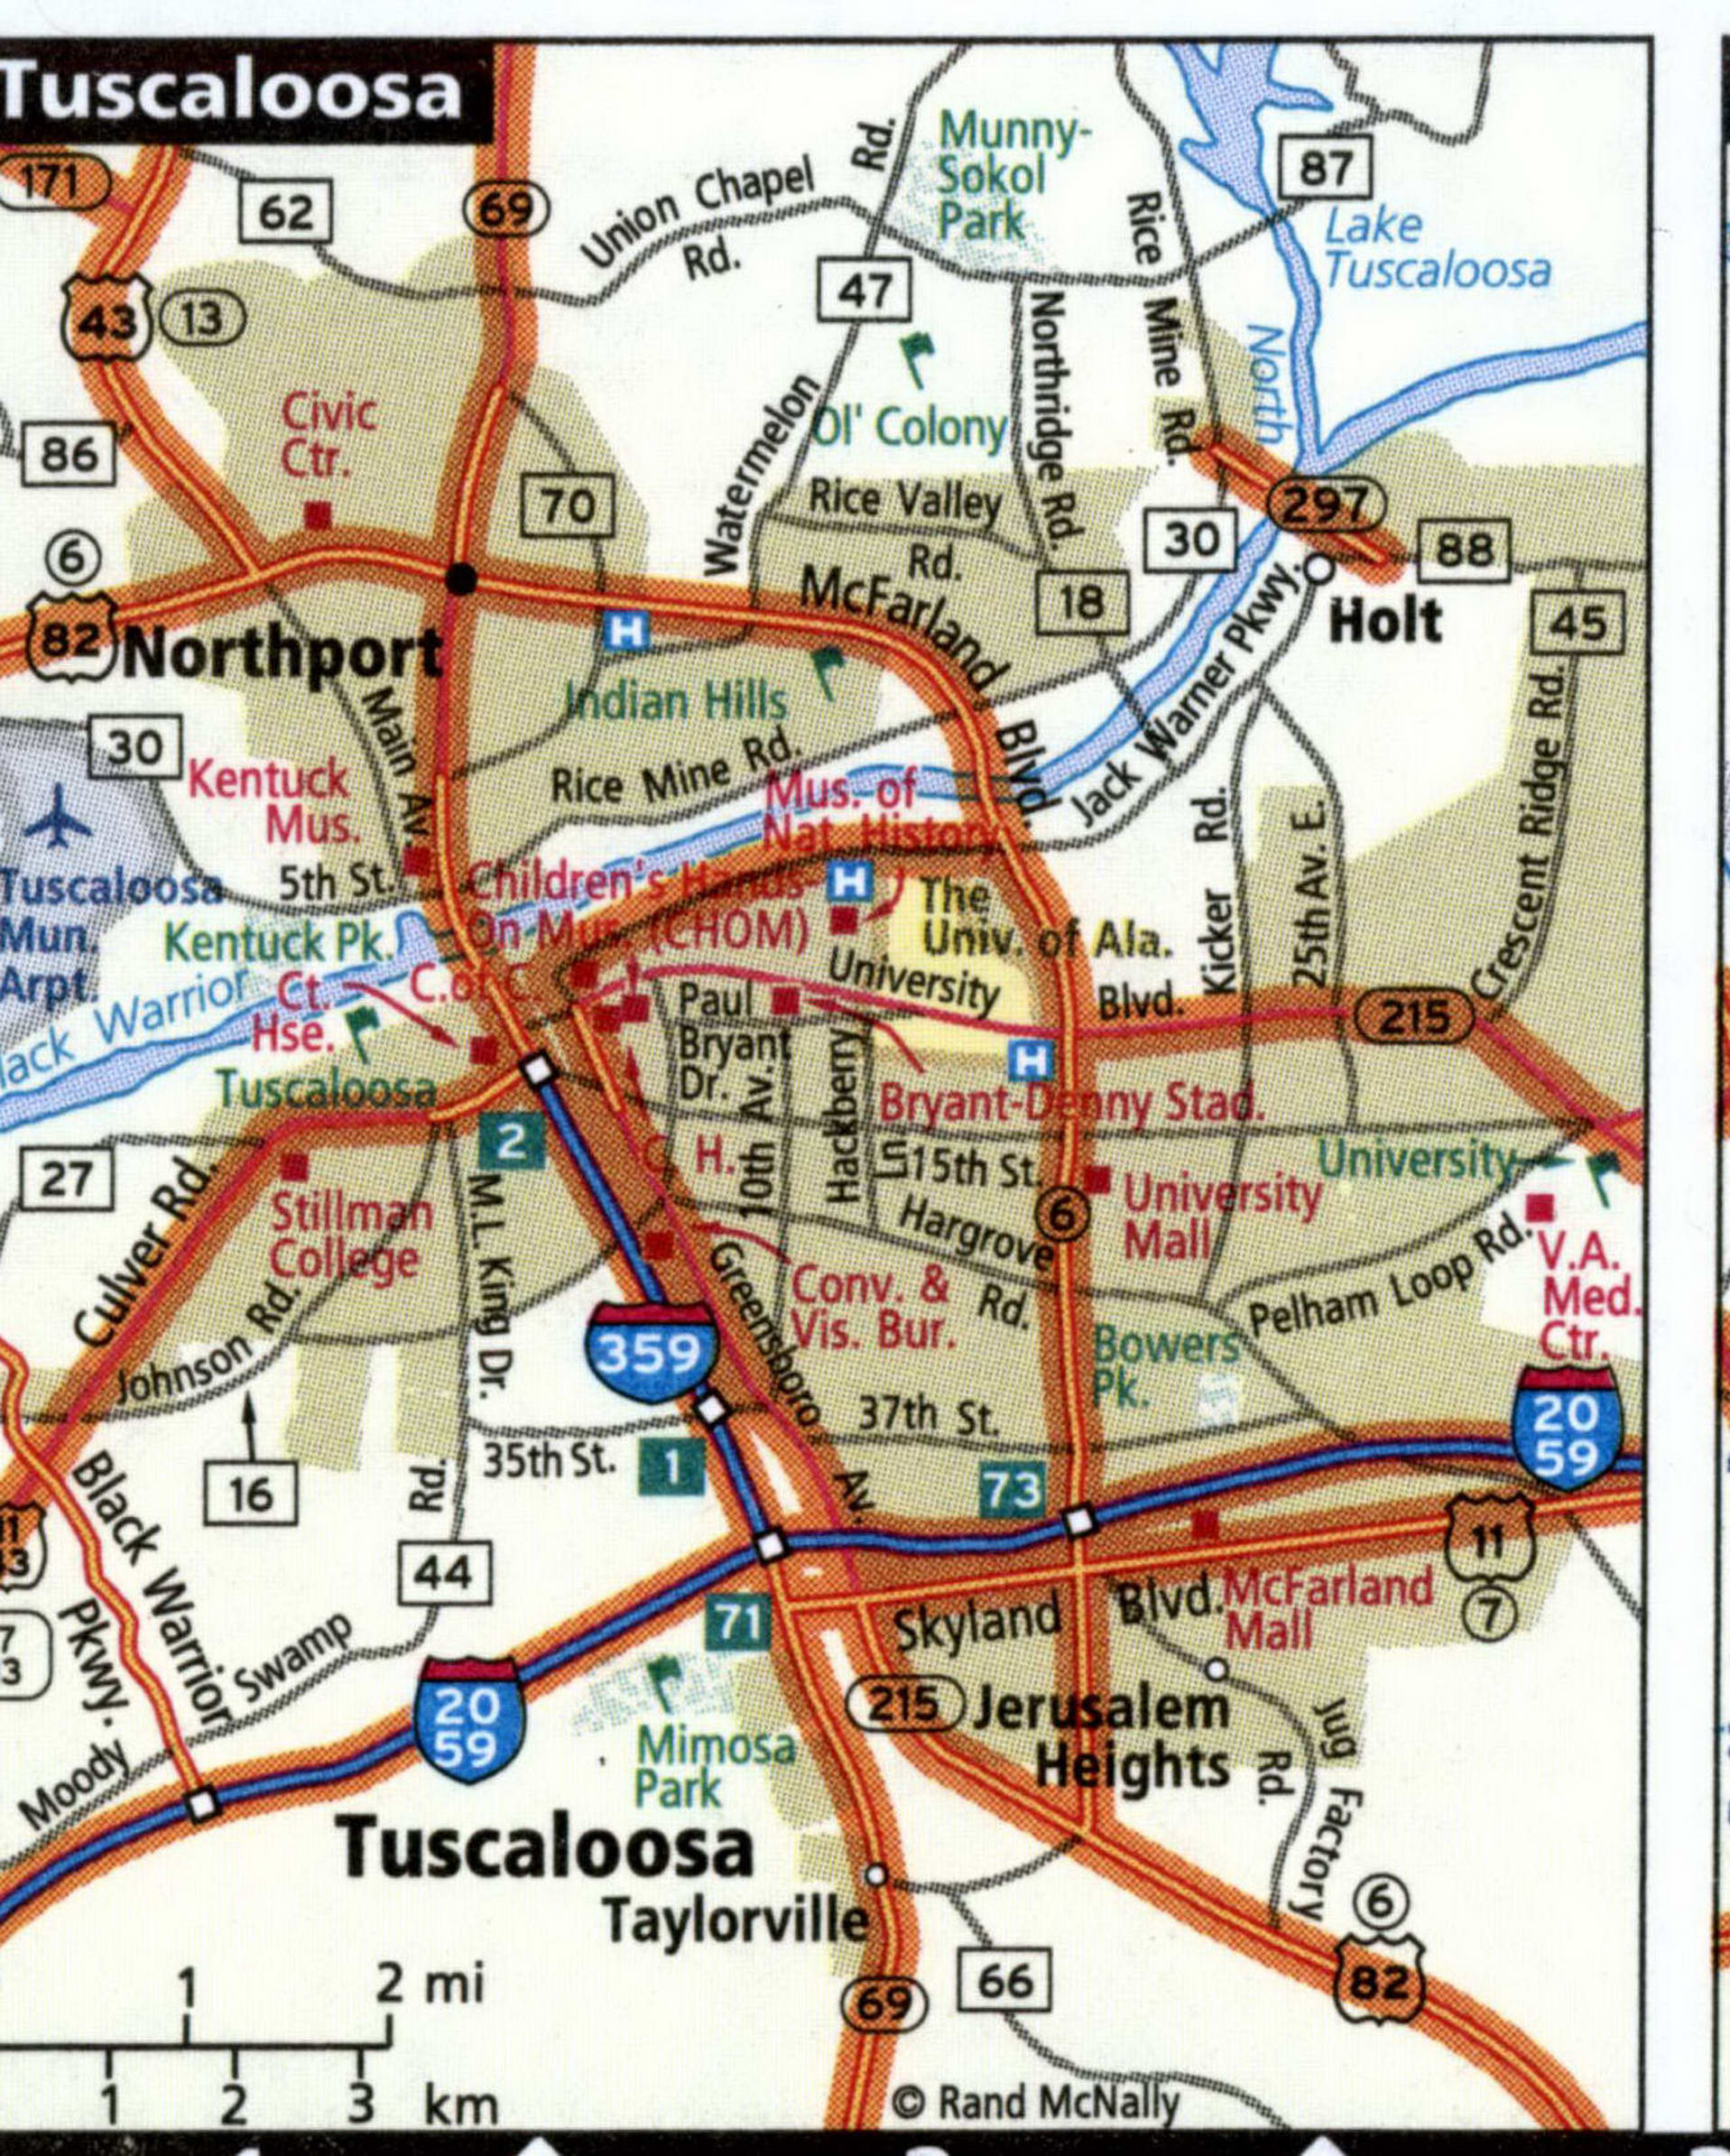 Tuscaloosa map for truckers